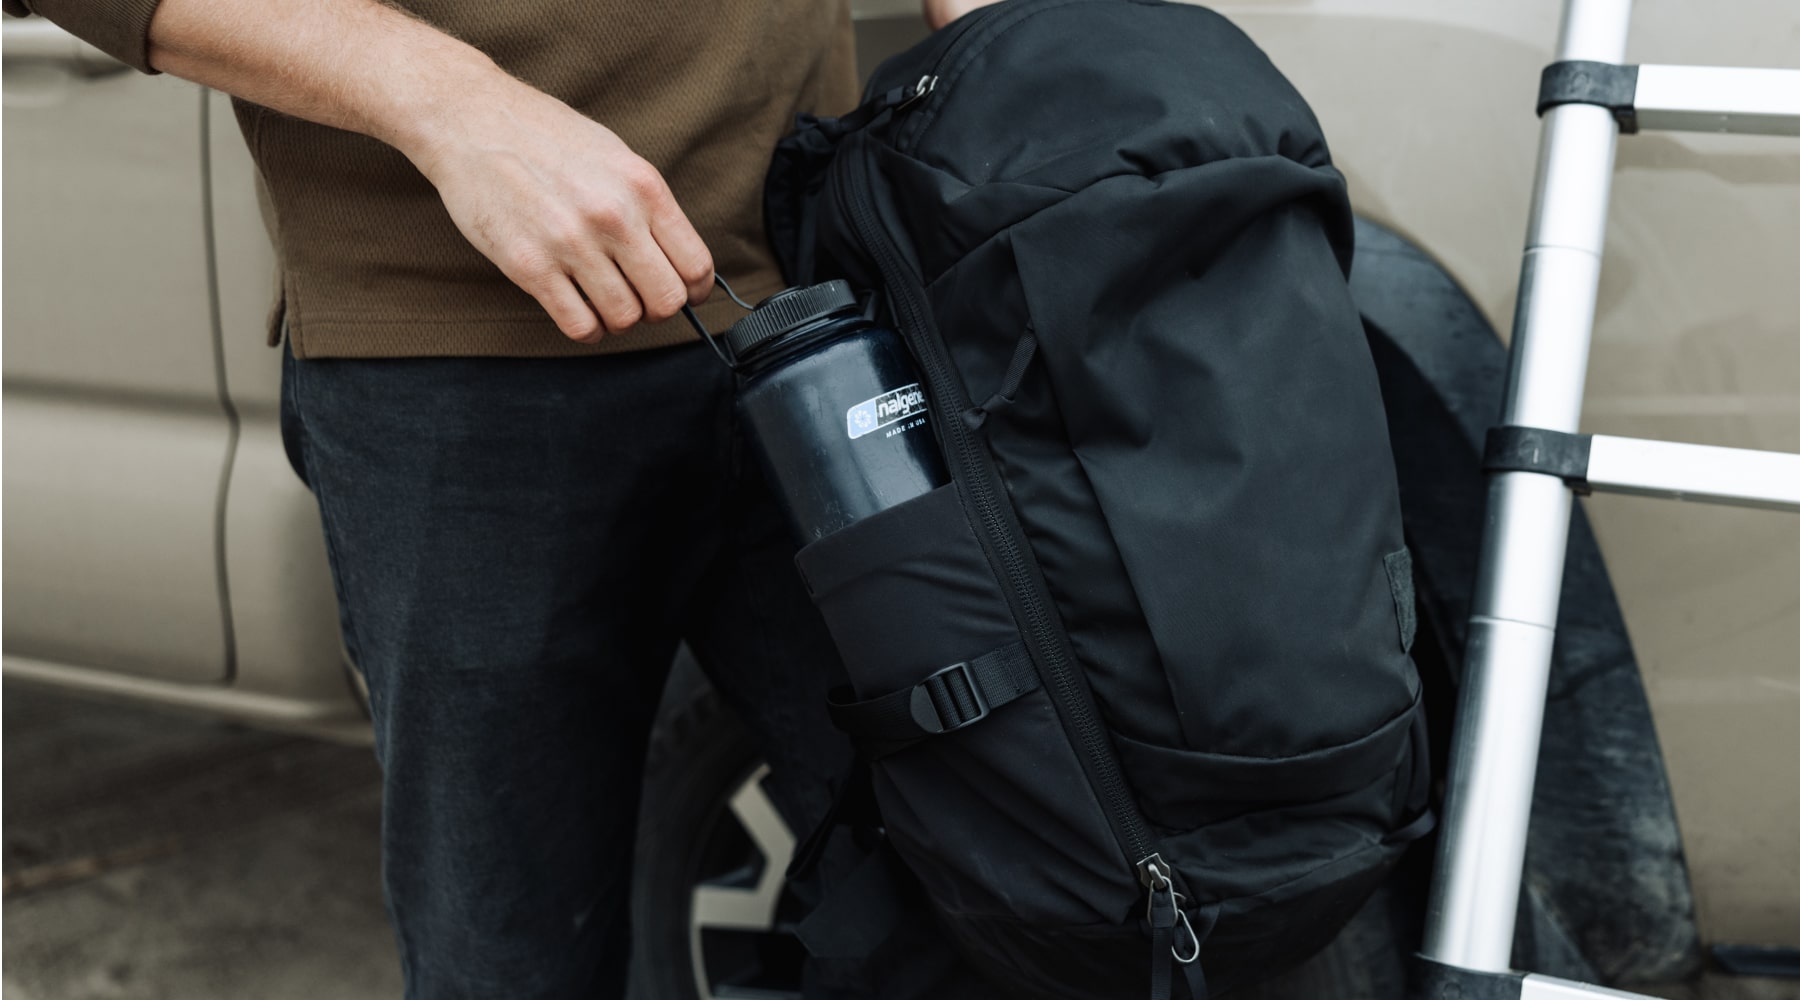 Mountain Panel Loader 30L comes with Water Bottle Pockets